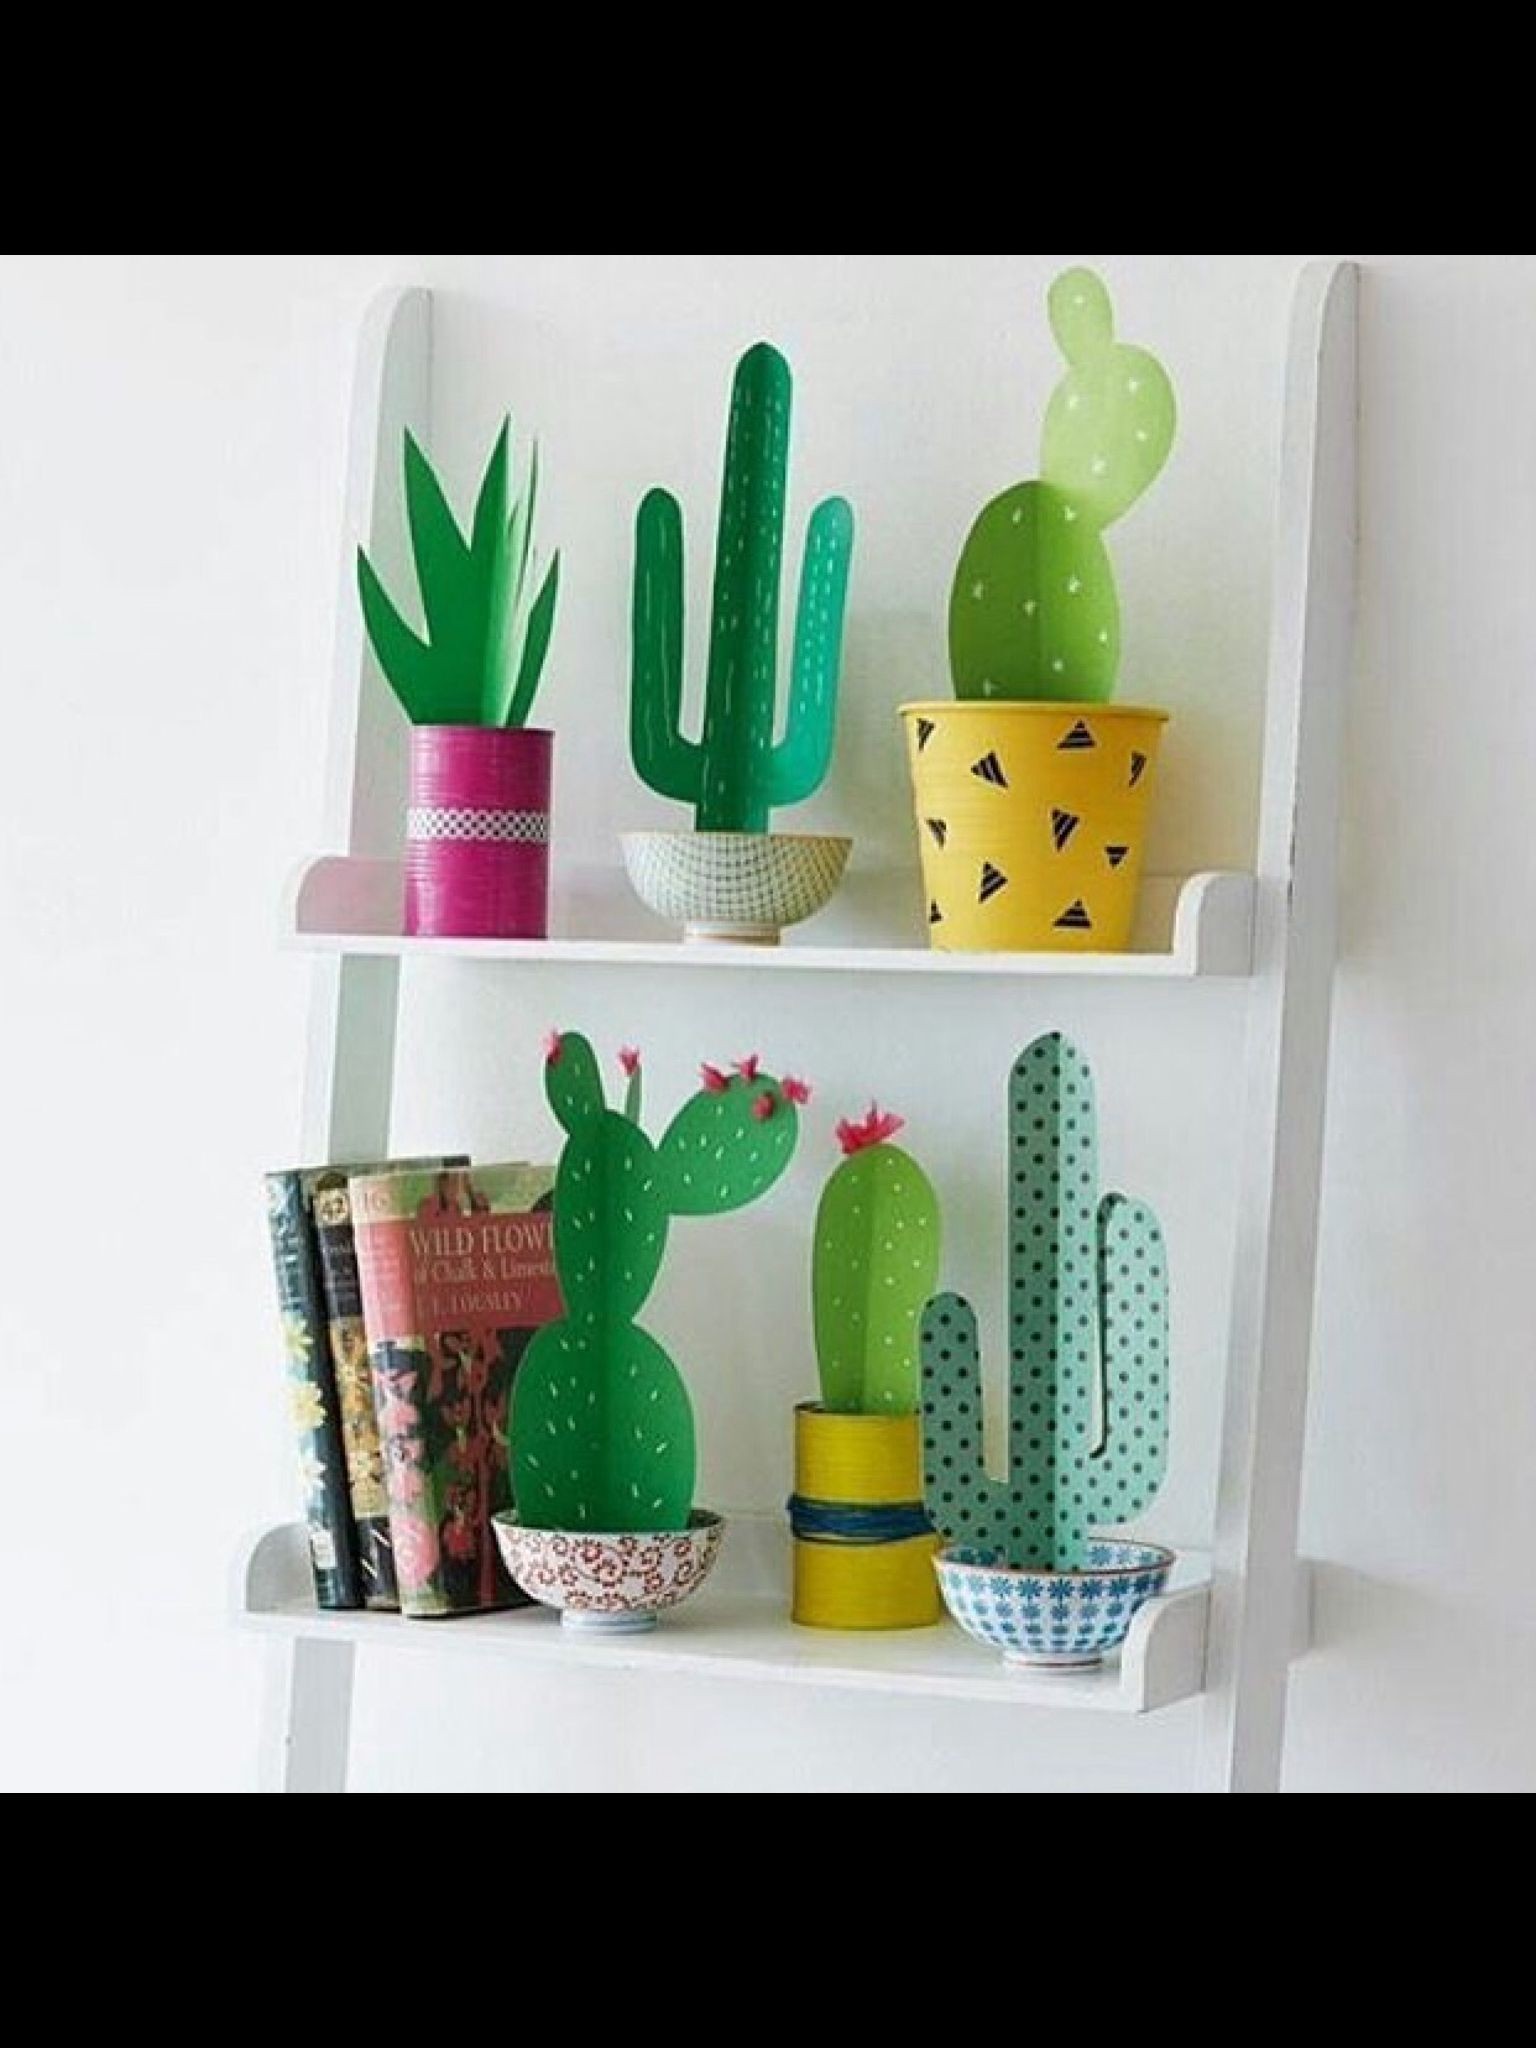 Papercraft Home 12 New Paper Craft Ideas for Room Decoration